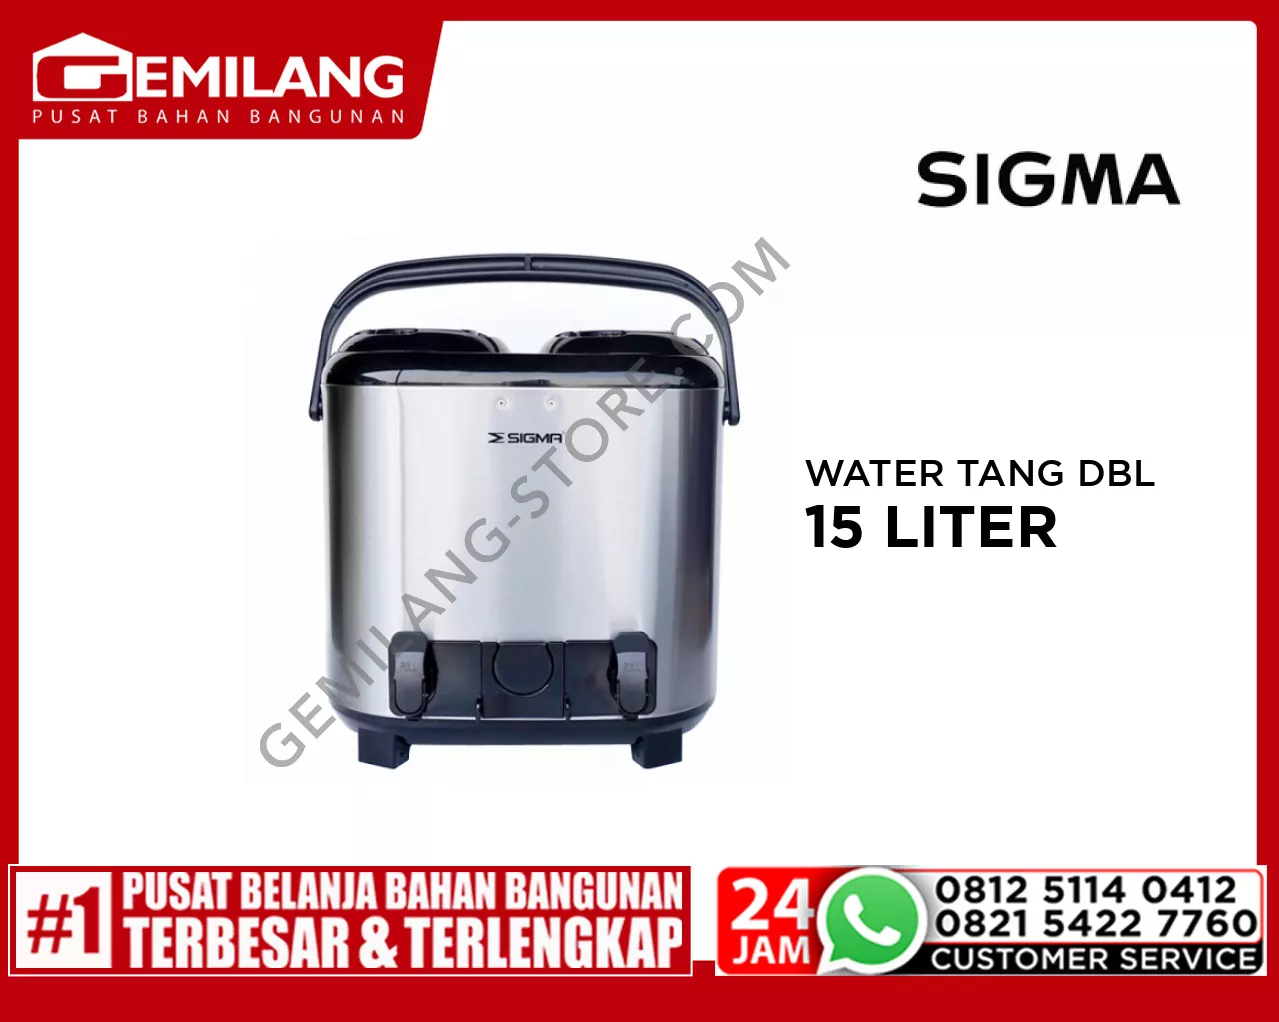 SIGMA WATER TANG DOUBLE 15tr